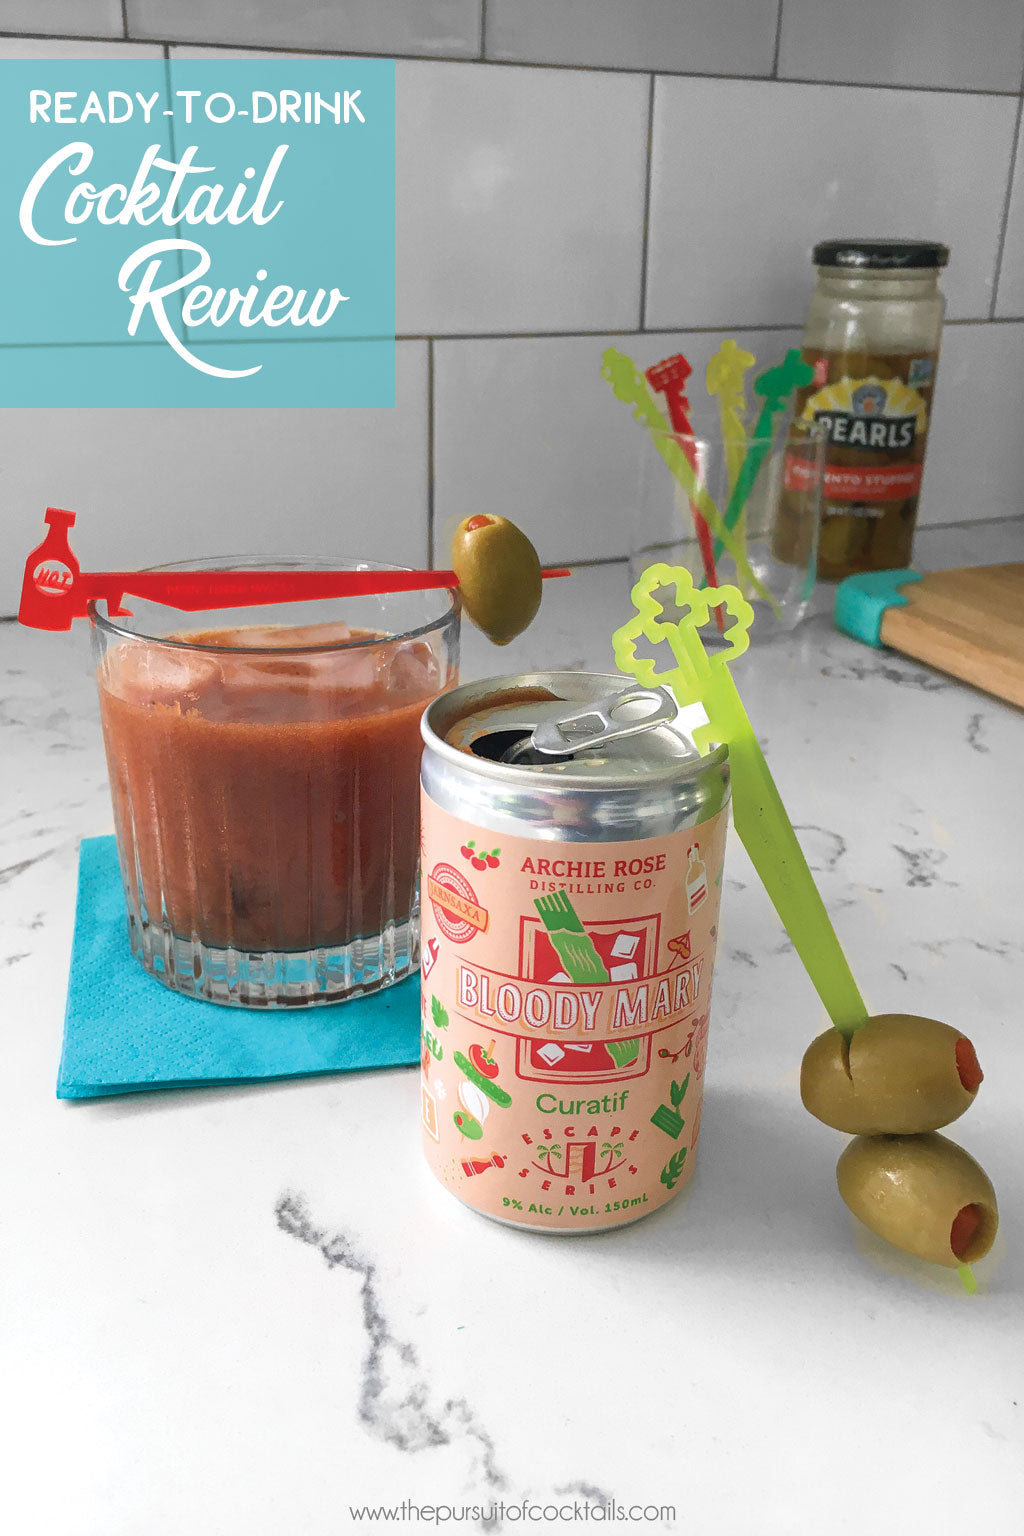 Ready-to-drink bloody mary review of Curatif Archie Rose Bloody Mary